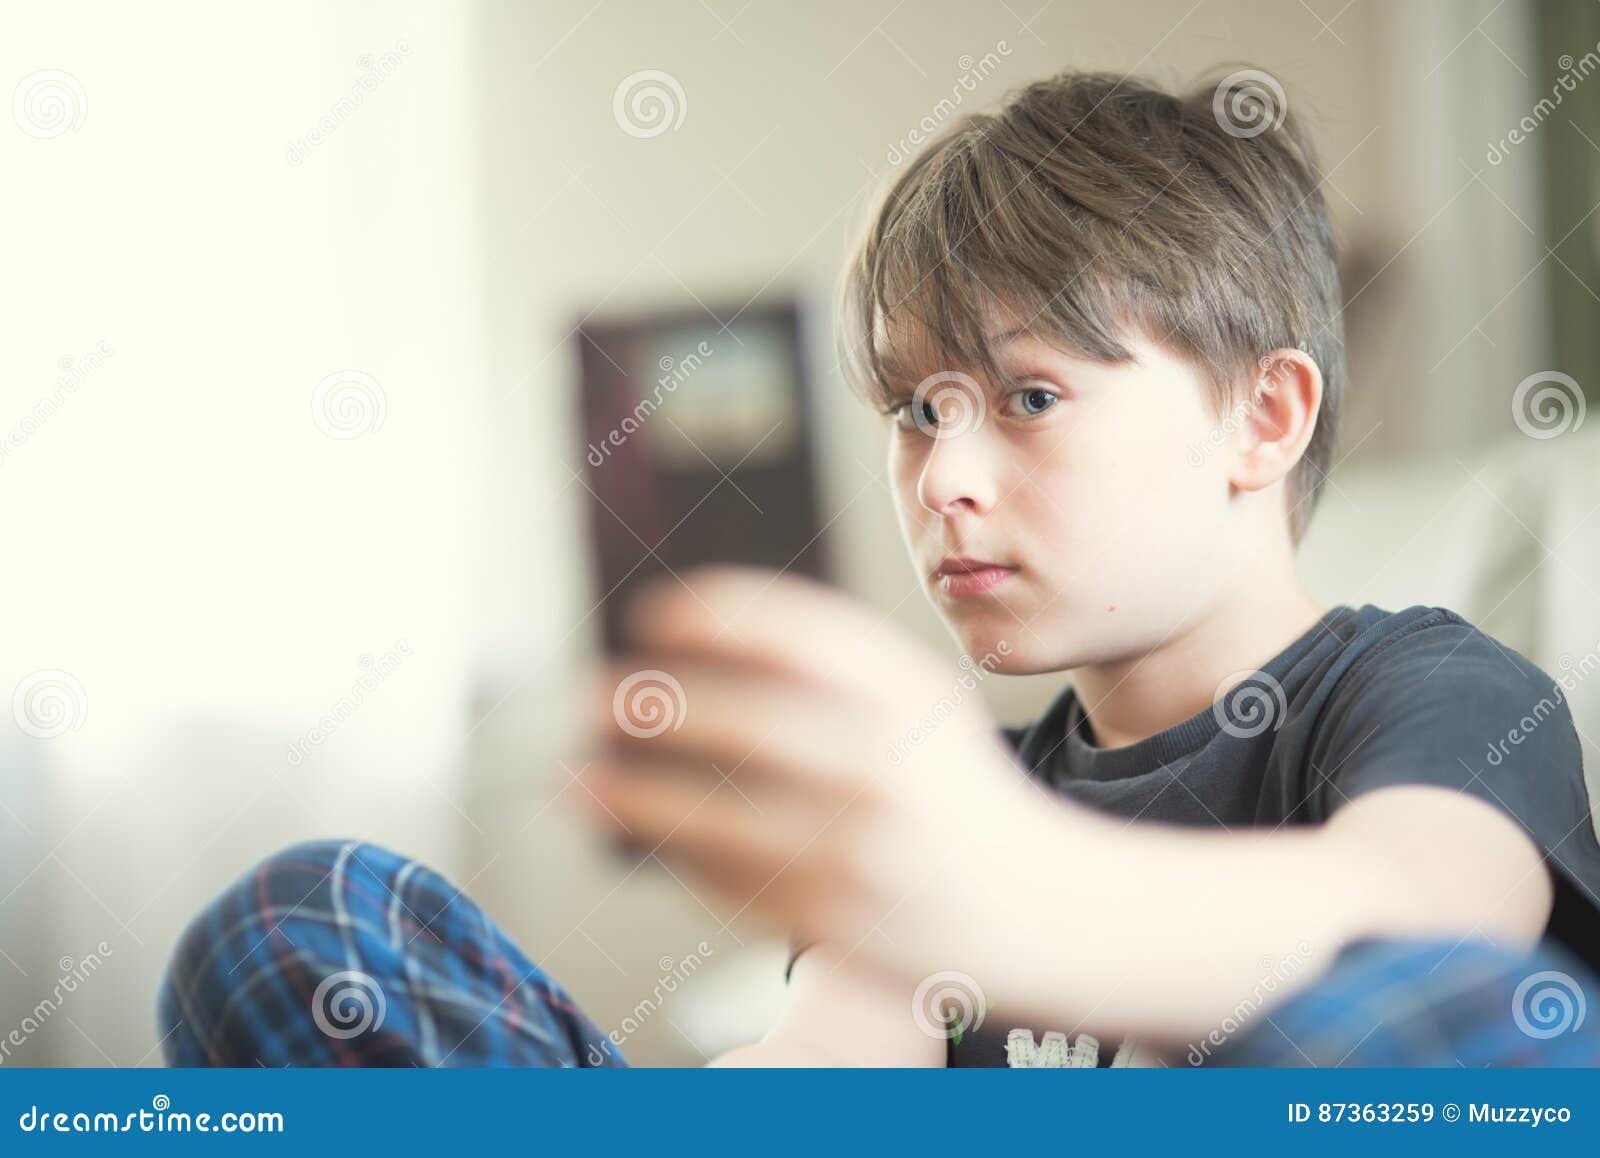 A boy doing selfie stock image. Image of happy, mobile - 87363259